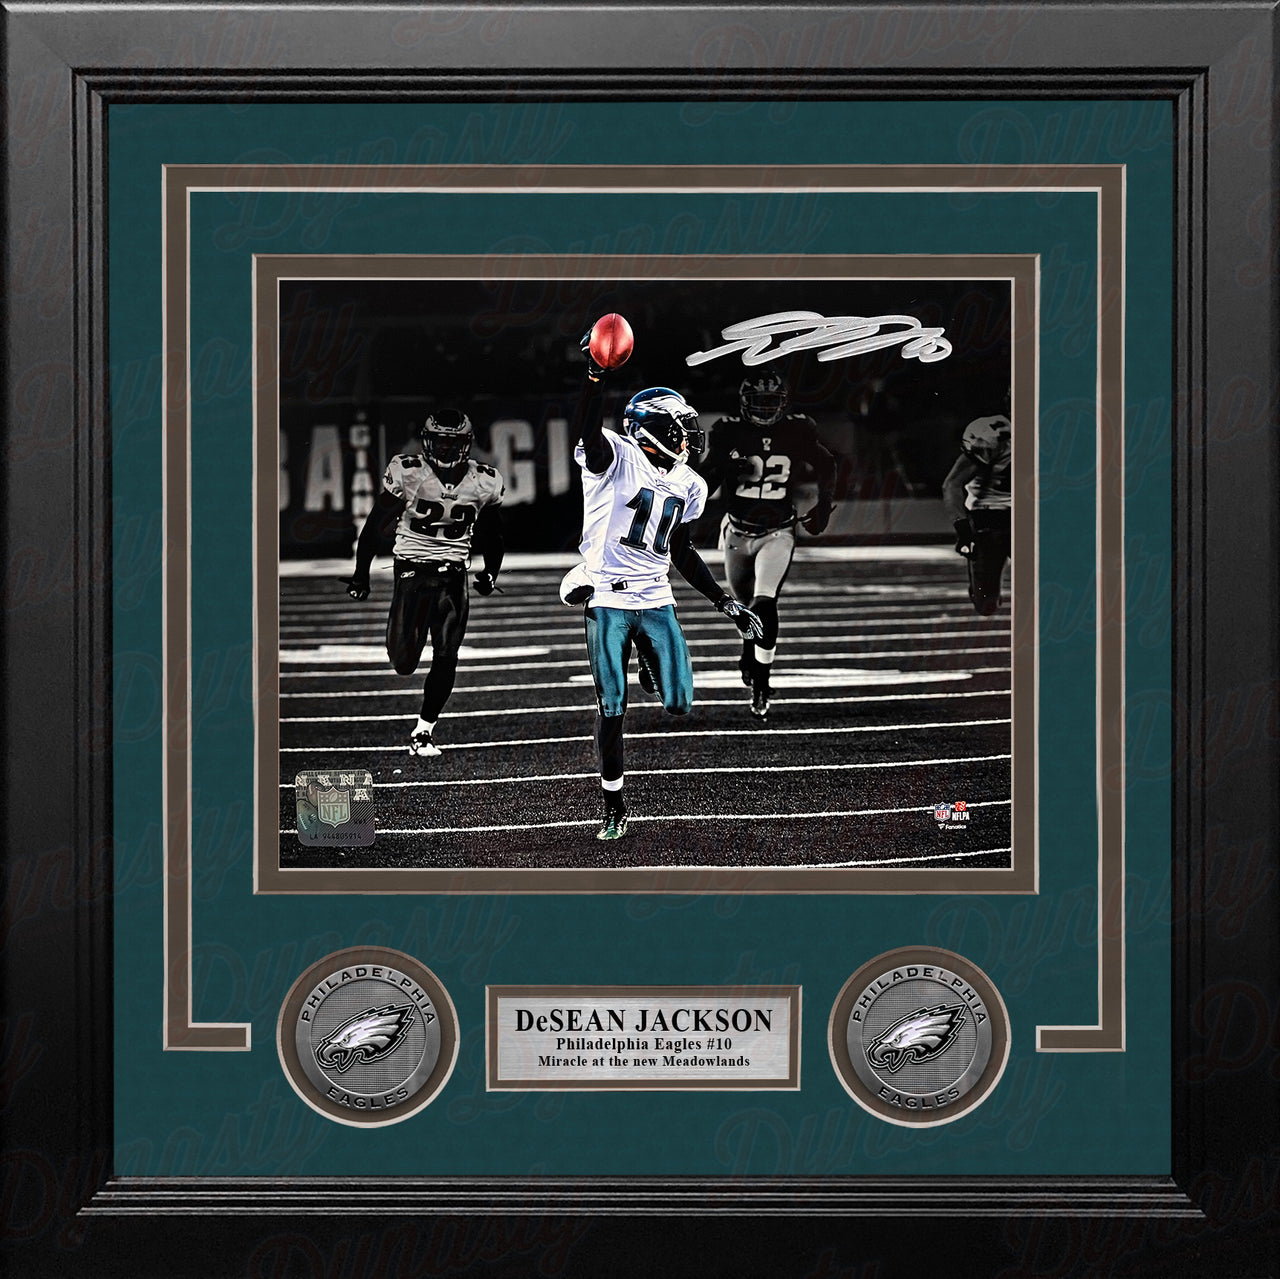 DeSean Jackson Miracle at the New Meadowlands Philadelphia Eagles Autographed 8" x 10" Framed Photo